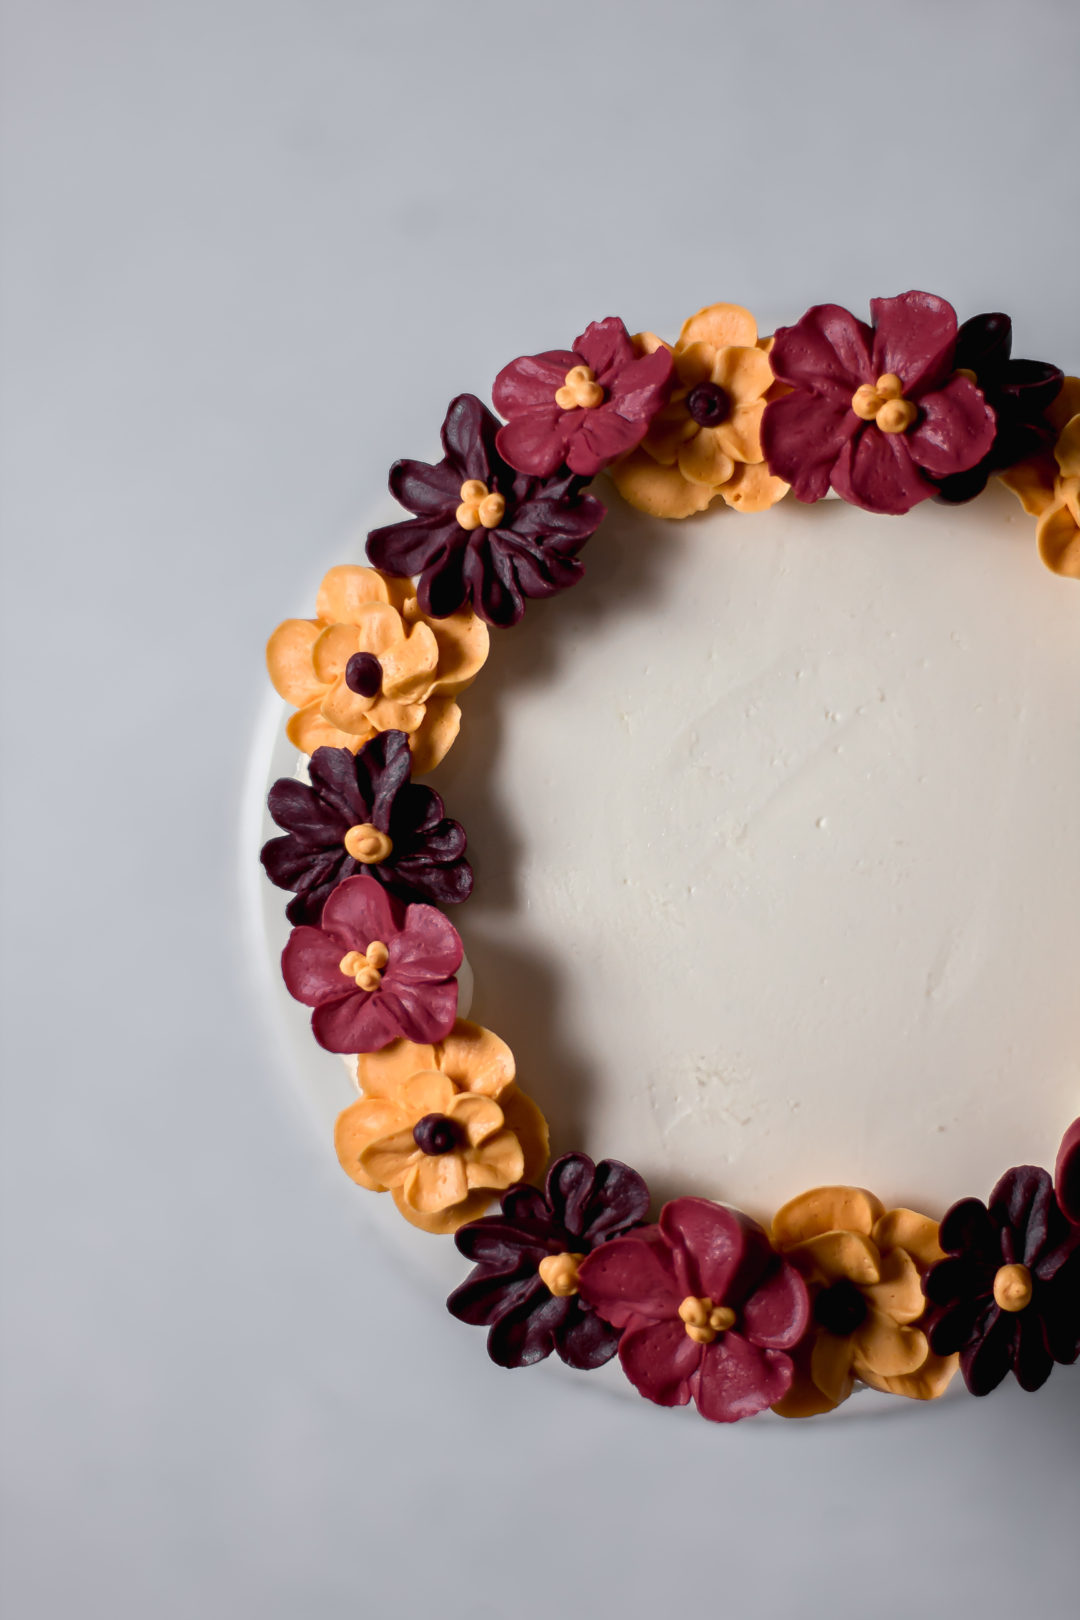 How to Pipe Simple Buttercream Flowers | Baking Butterly Love